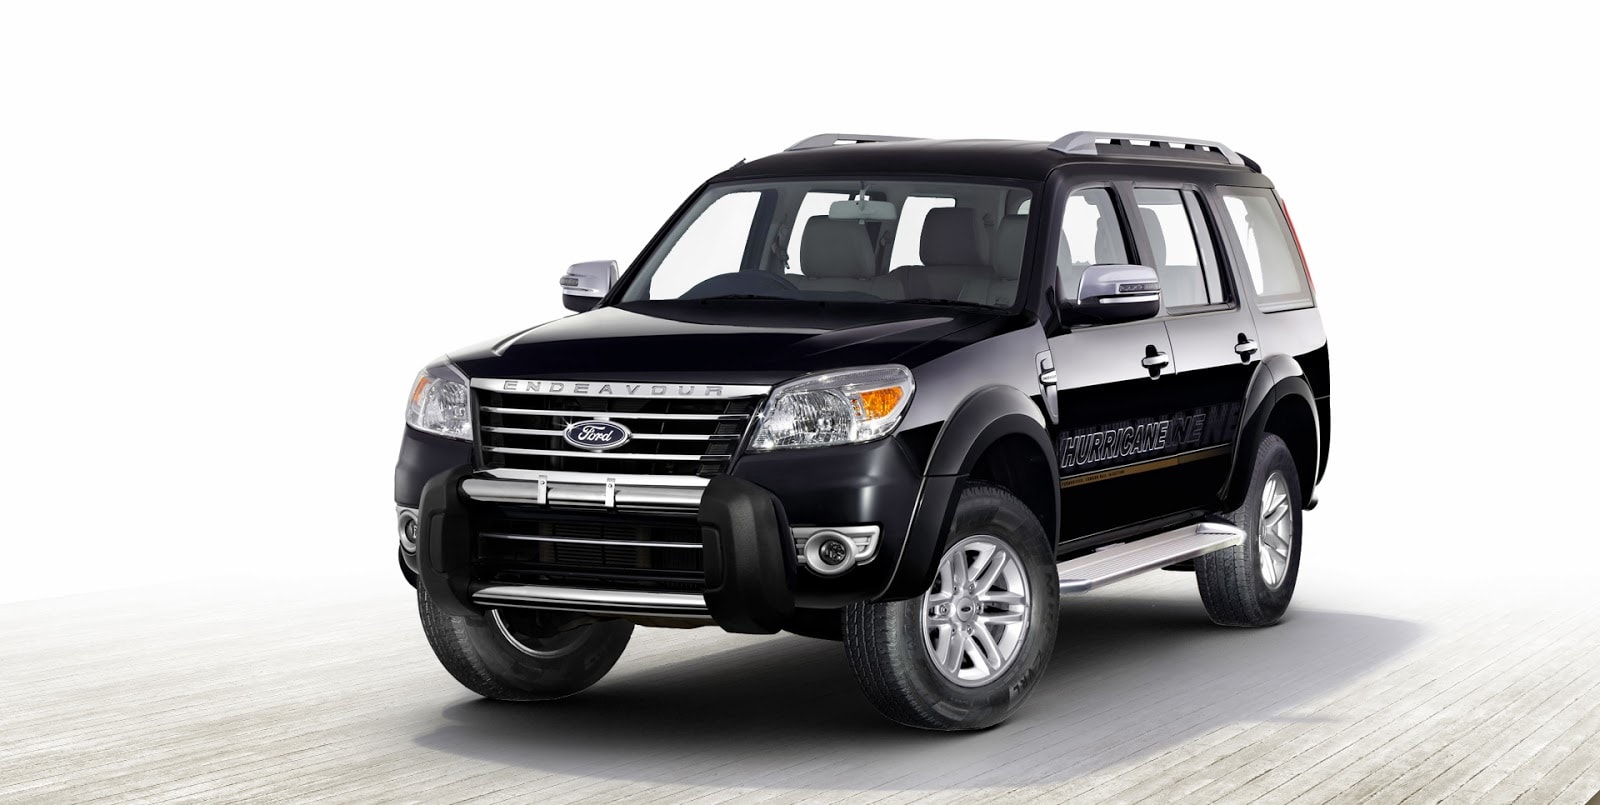 Ford endeavour on road price in hyderabad #7